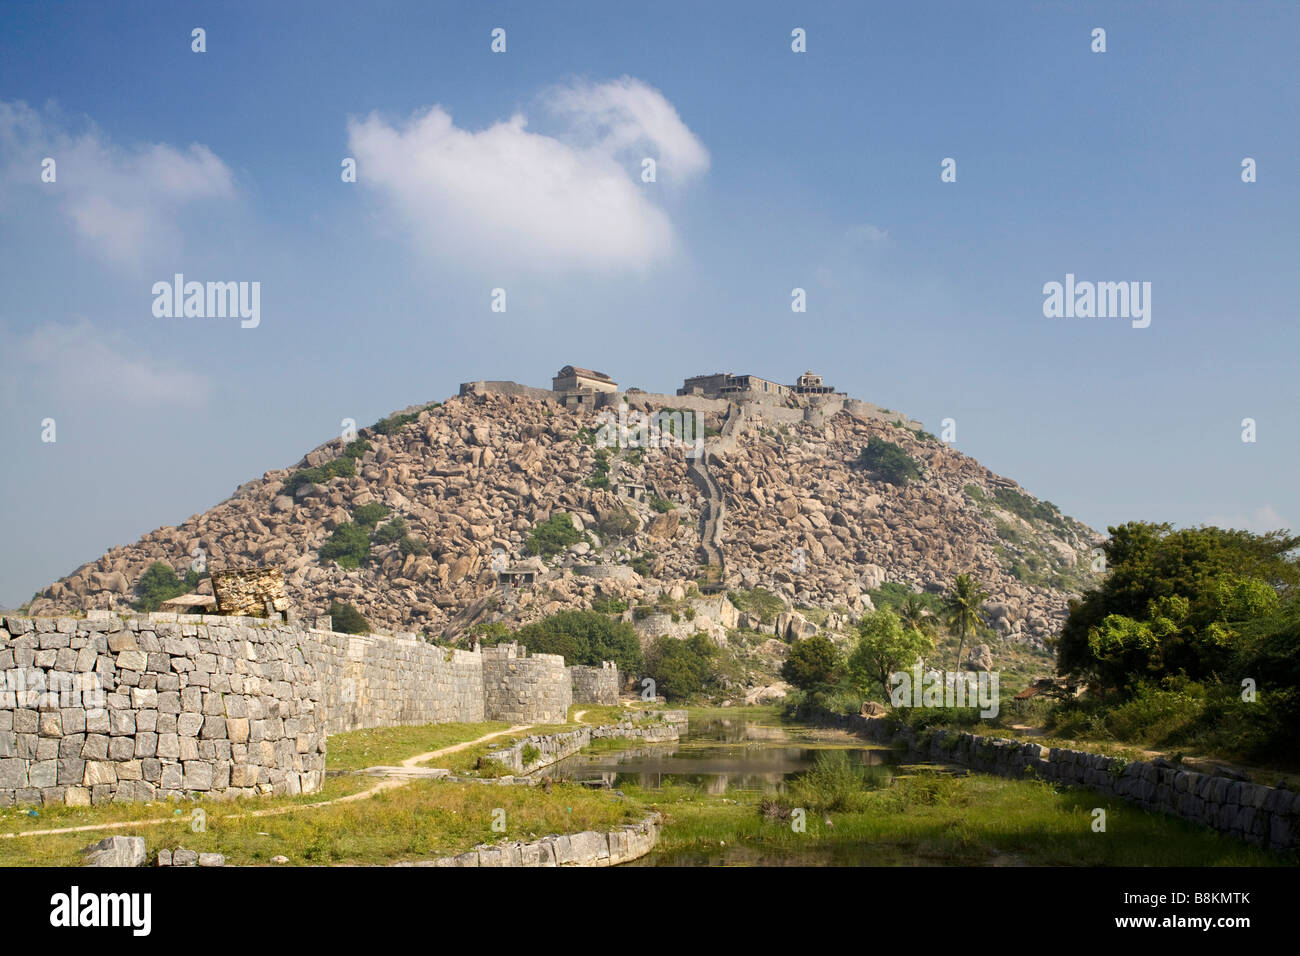 India Tamil Nadu Gingee Fort Krishnagiri hilltop fort from walls and moat Stock Photo